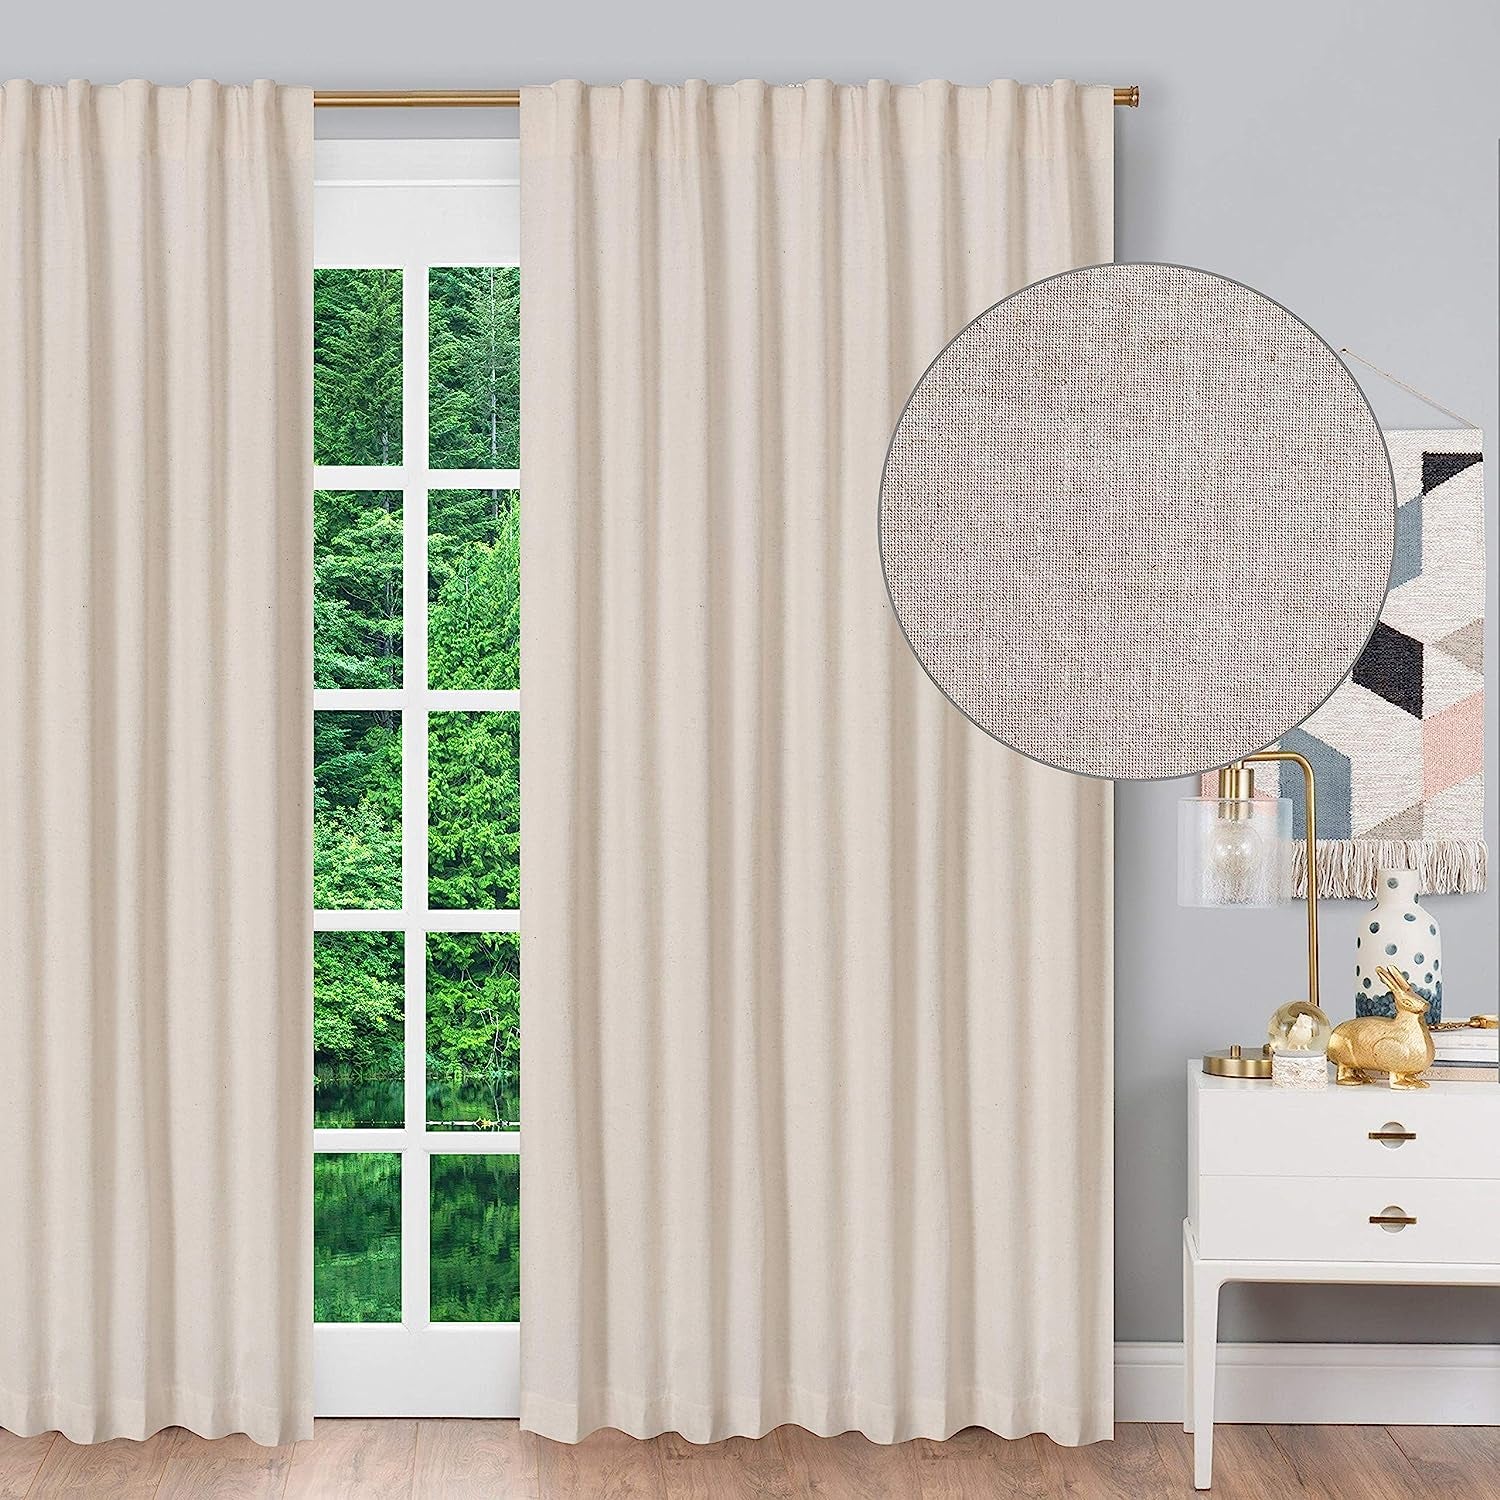 A&A Fabrics Farmhouse Curtains Tab Top Curtains Room Darkening Drapes, Window Panels in Natural 70% Cotton 30% Linen, There Are Drapes for the Kitchen, Living Room, Bedroom 1 Pair (Set of 2)(50X108)  A&A Fabrics   